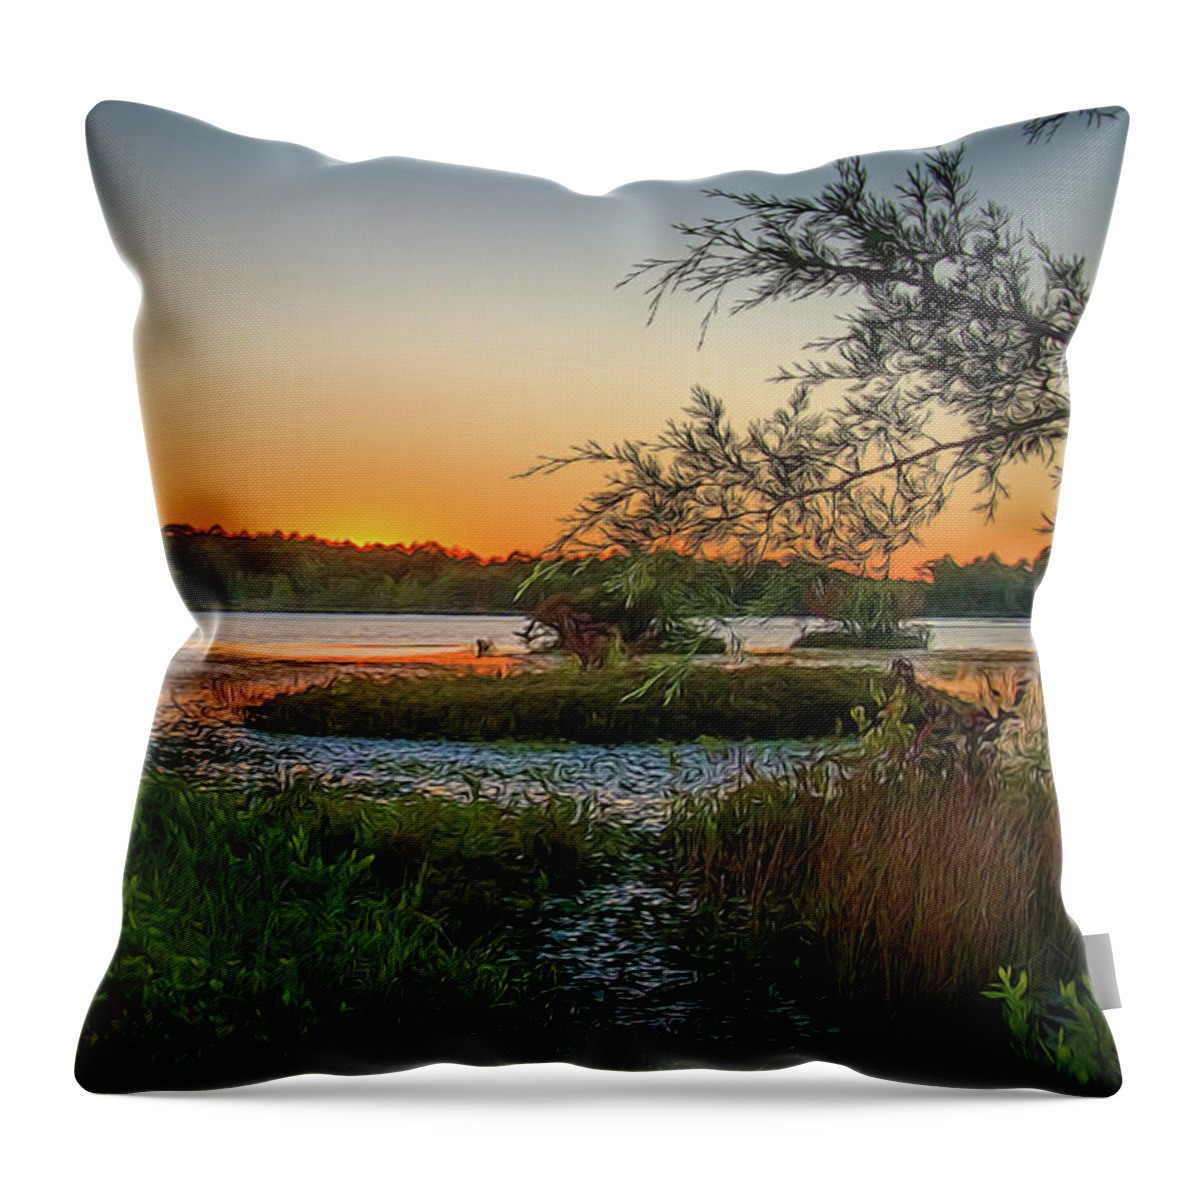 Sunset Throw Pillow featuring the photograph Serene Sunset by Beth Venner